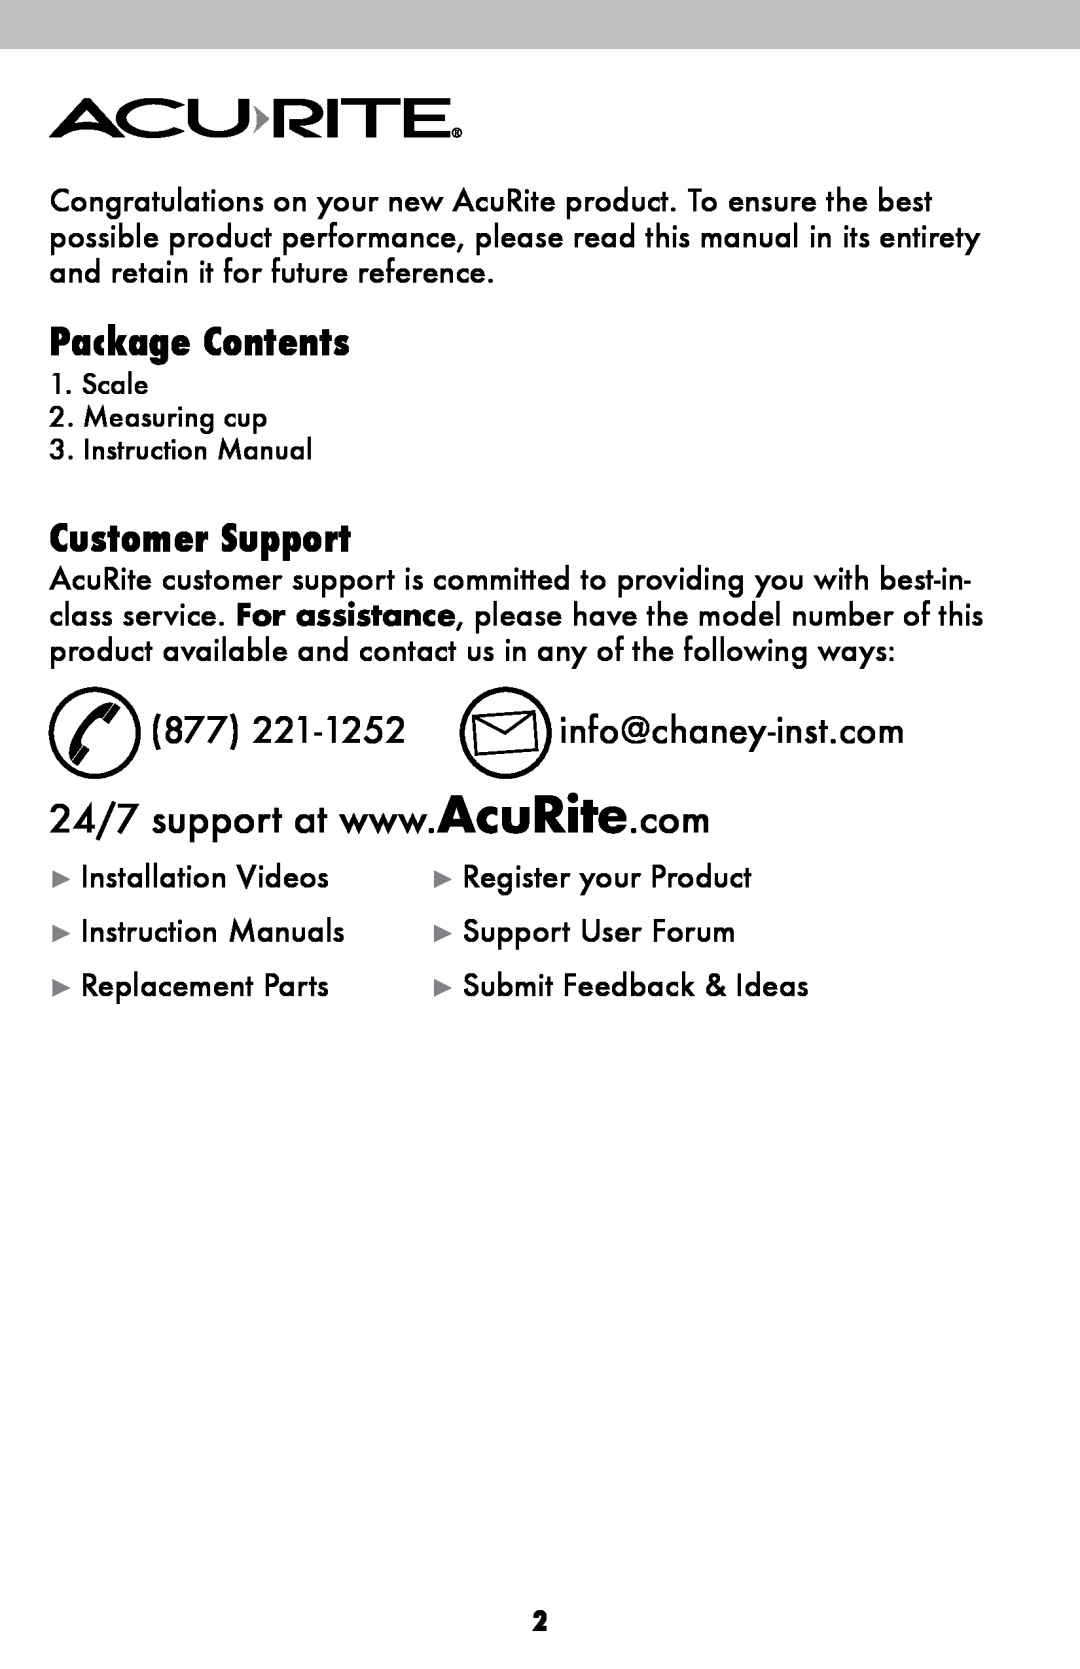 Acu-Rite 930 Package Contents, Customer Support, 877 221-1252 info@chaney-inst.com, Installation Videos, Replacement Parts 